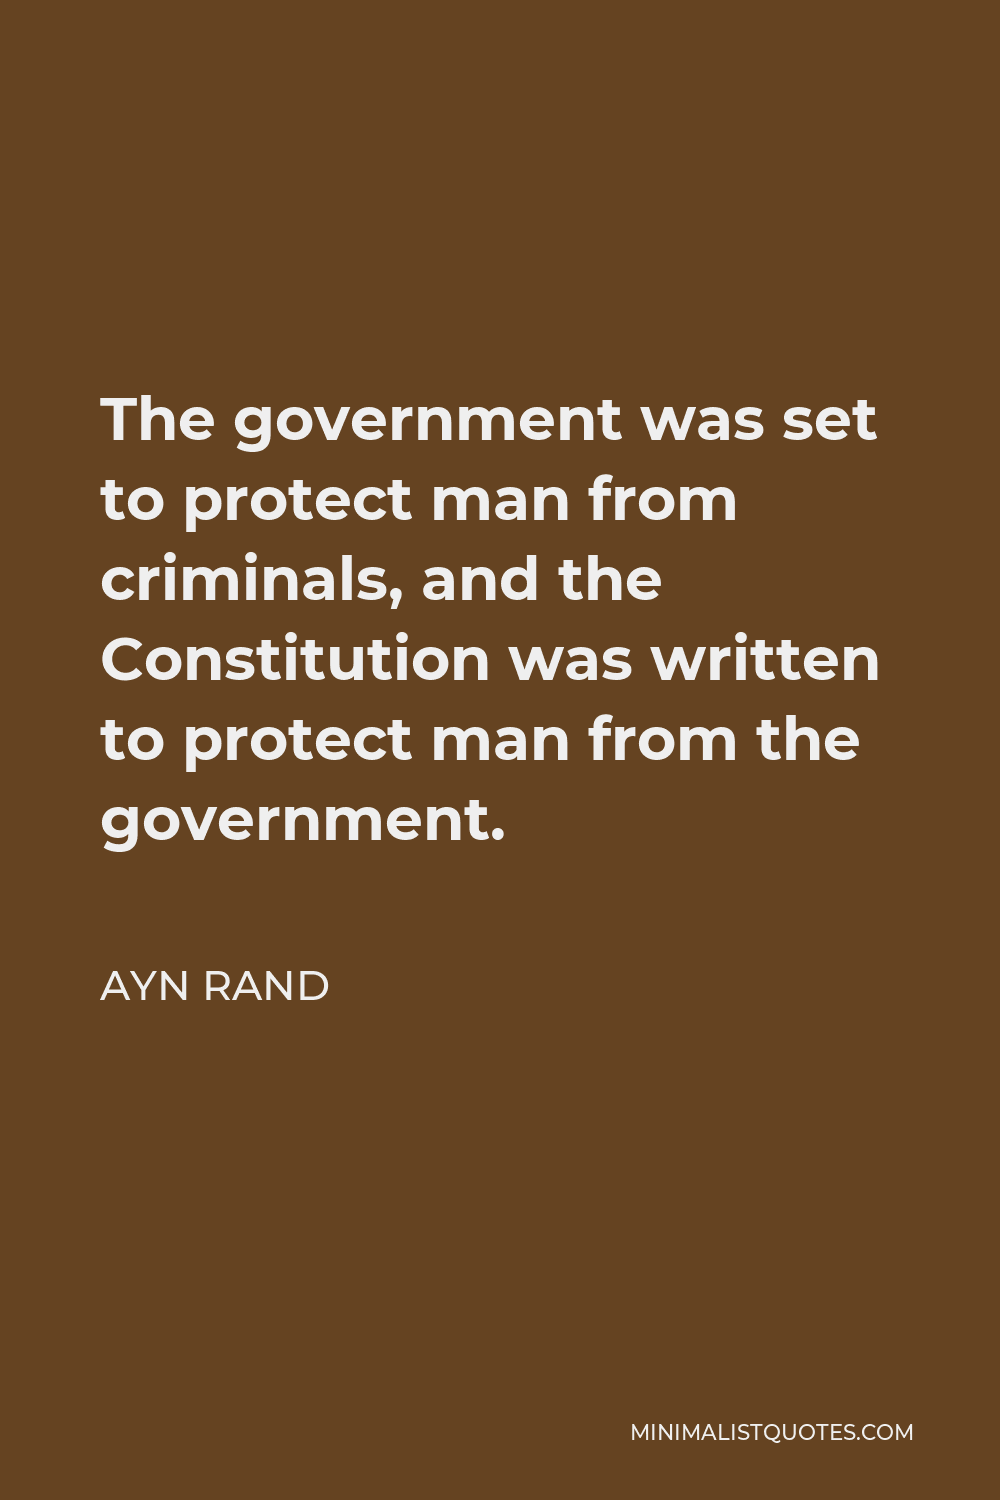 Ayn Rand Quote - The government was set to protect man from criminals, and the Constitution was written to protect man from the government.